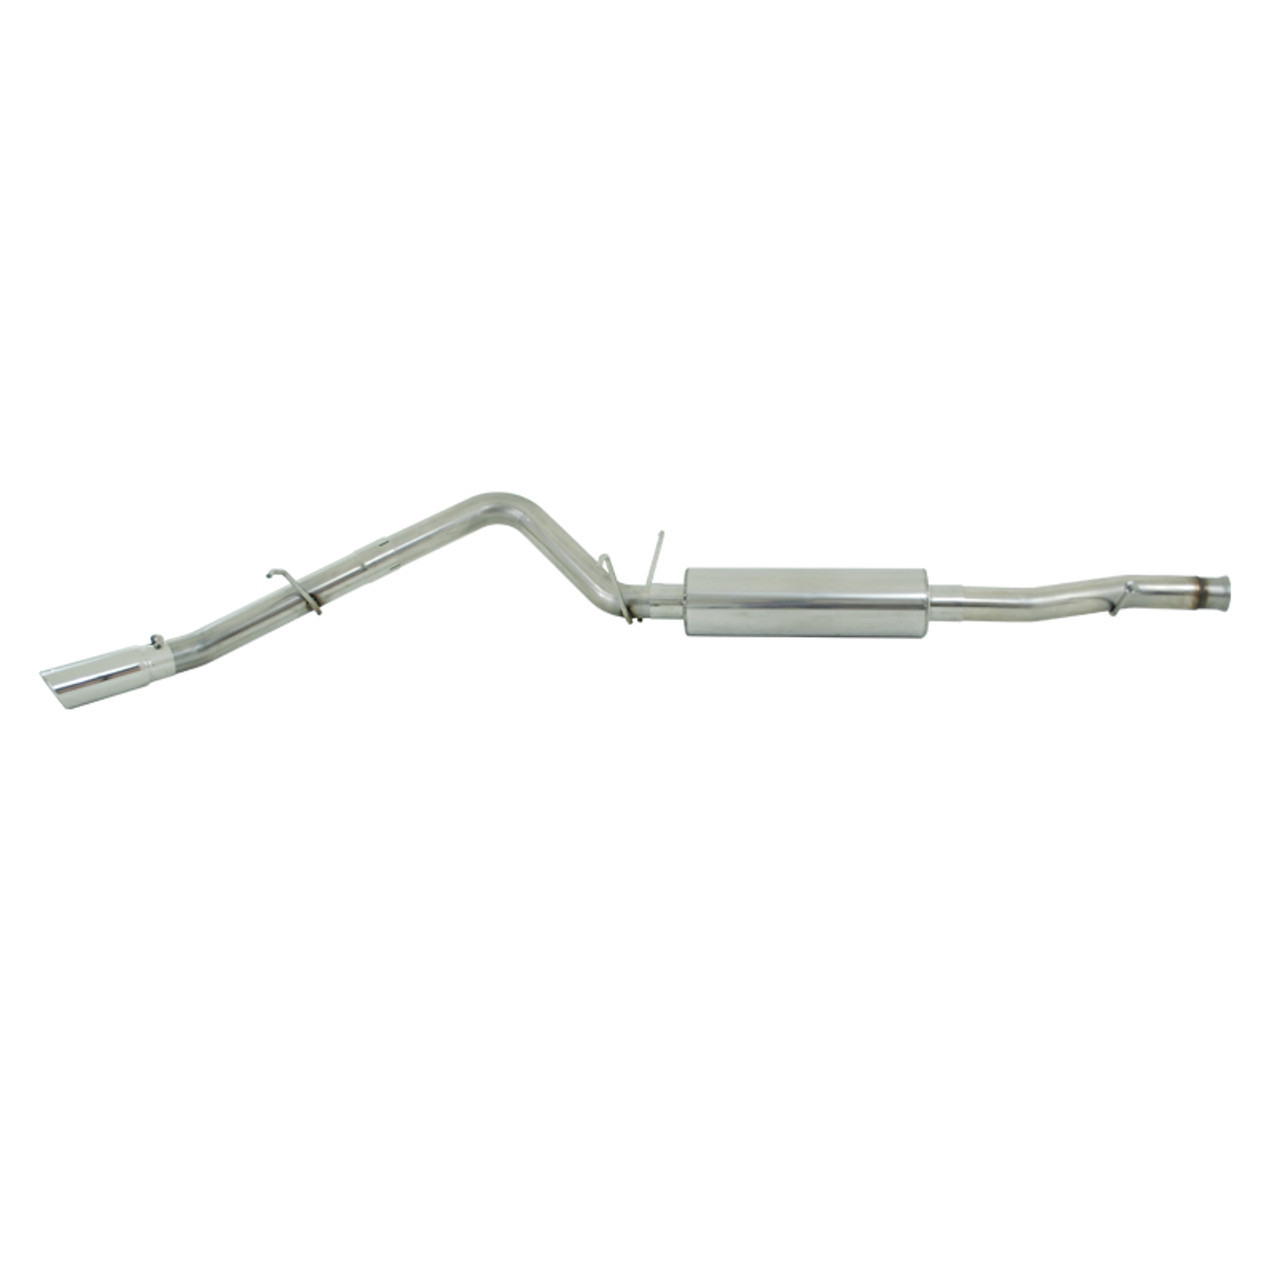 S5062409 - MBRP EXHAUST 2009-2011 GMC YUKON CHEVY TAHOE 5.3L CAT BACK SINGLE SIDE STAINLESS